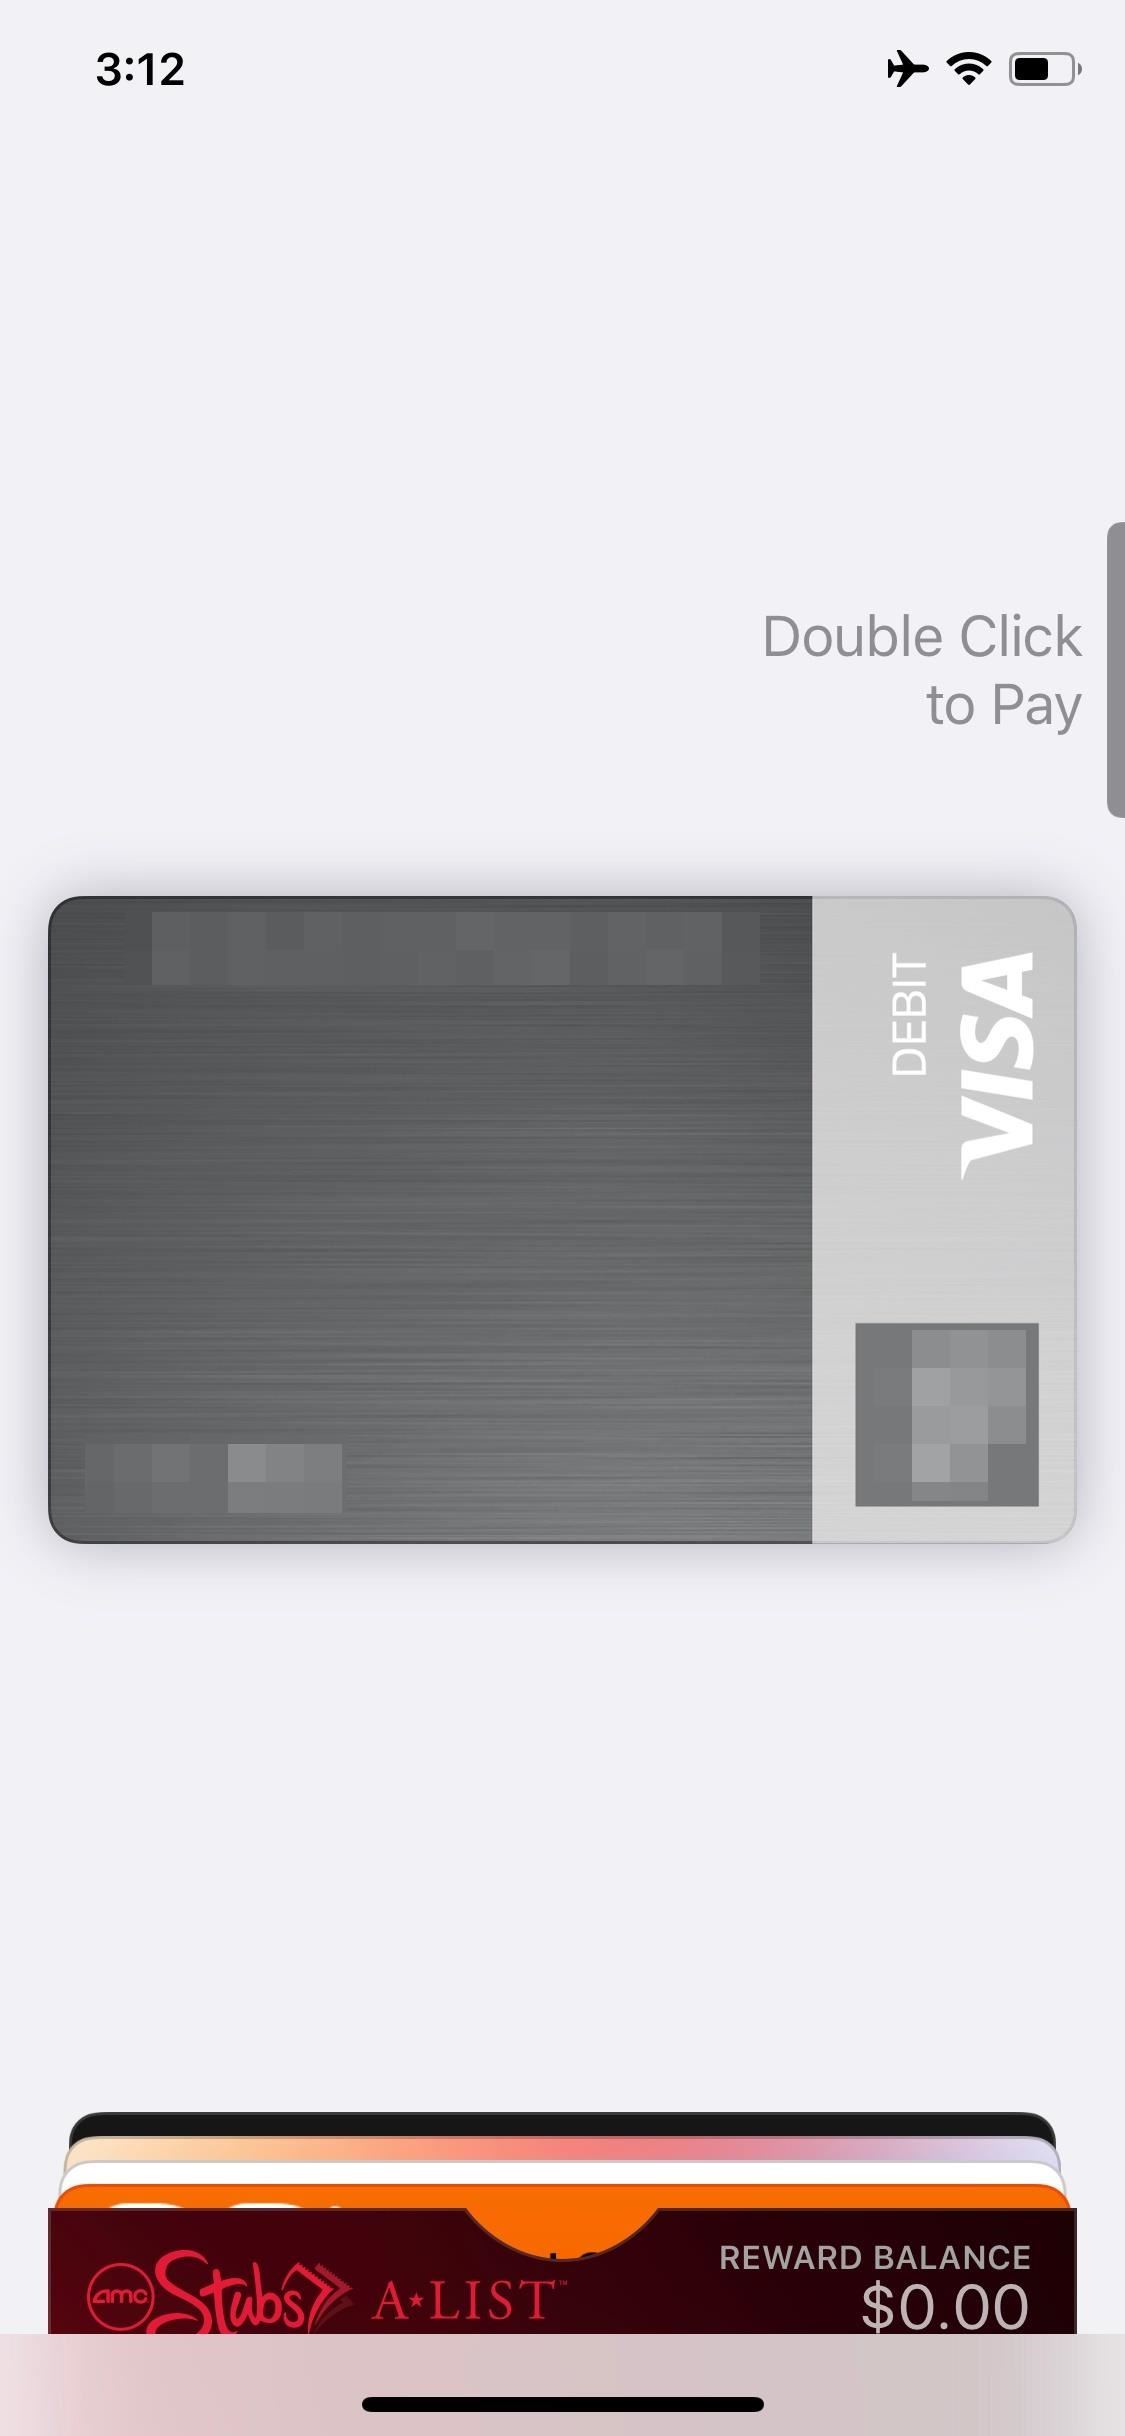 Why You Should Open the Wallet App Before You Tap & Pay with Your iPhone